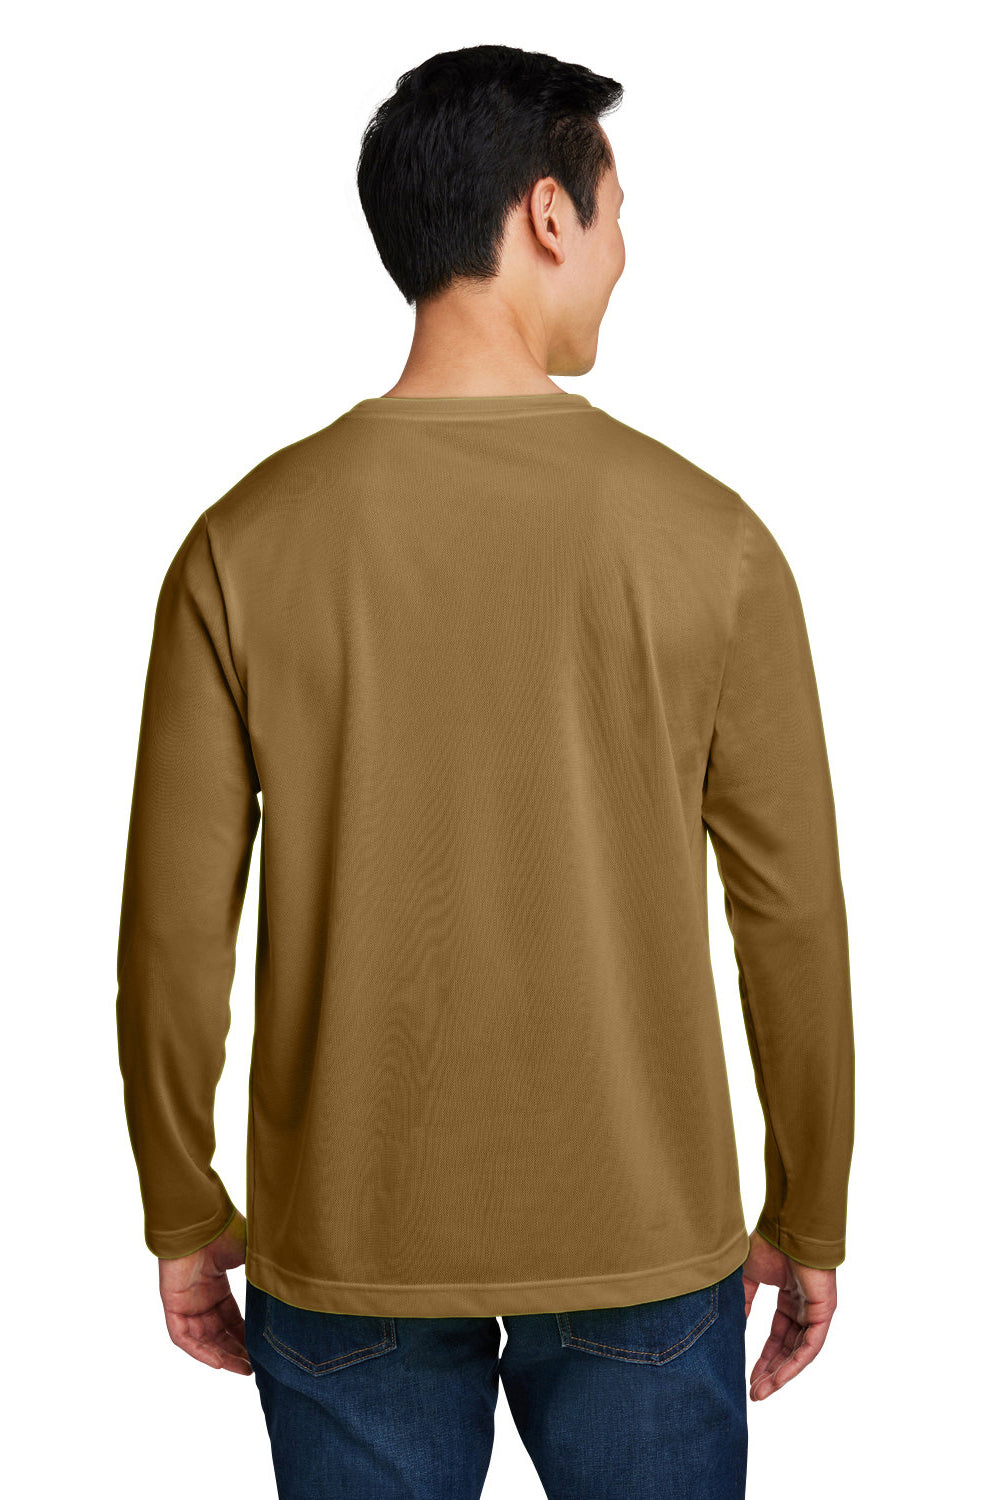 Harriton M118L Mens Charge Moisture Wicking Long Sleeve Crewneck T-Shirt Coyote Brown Back